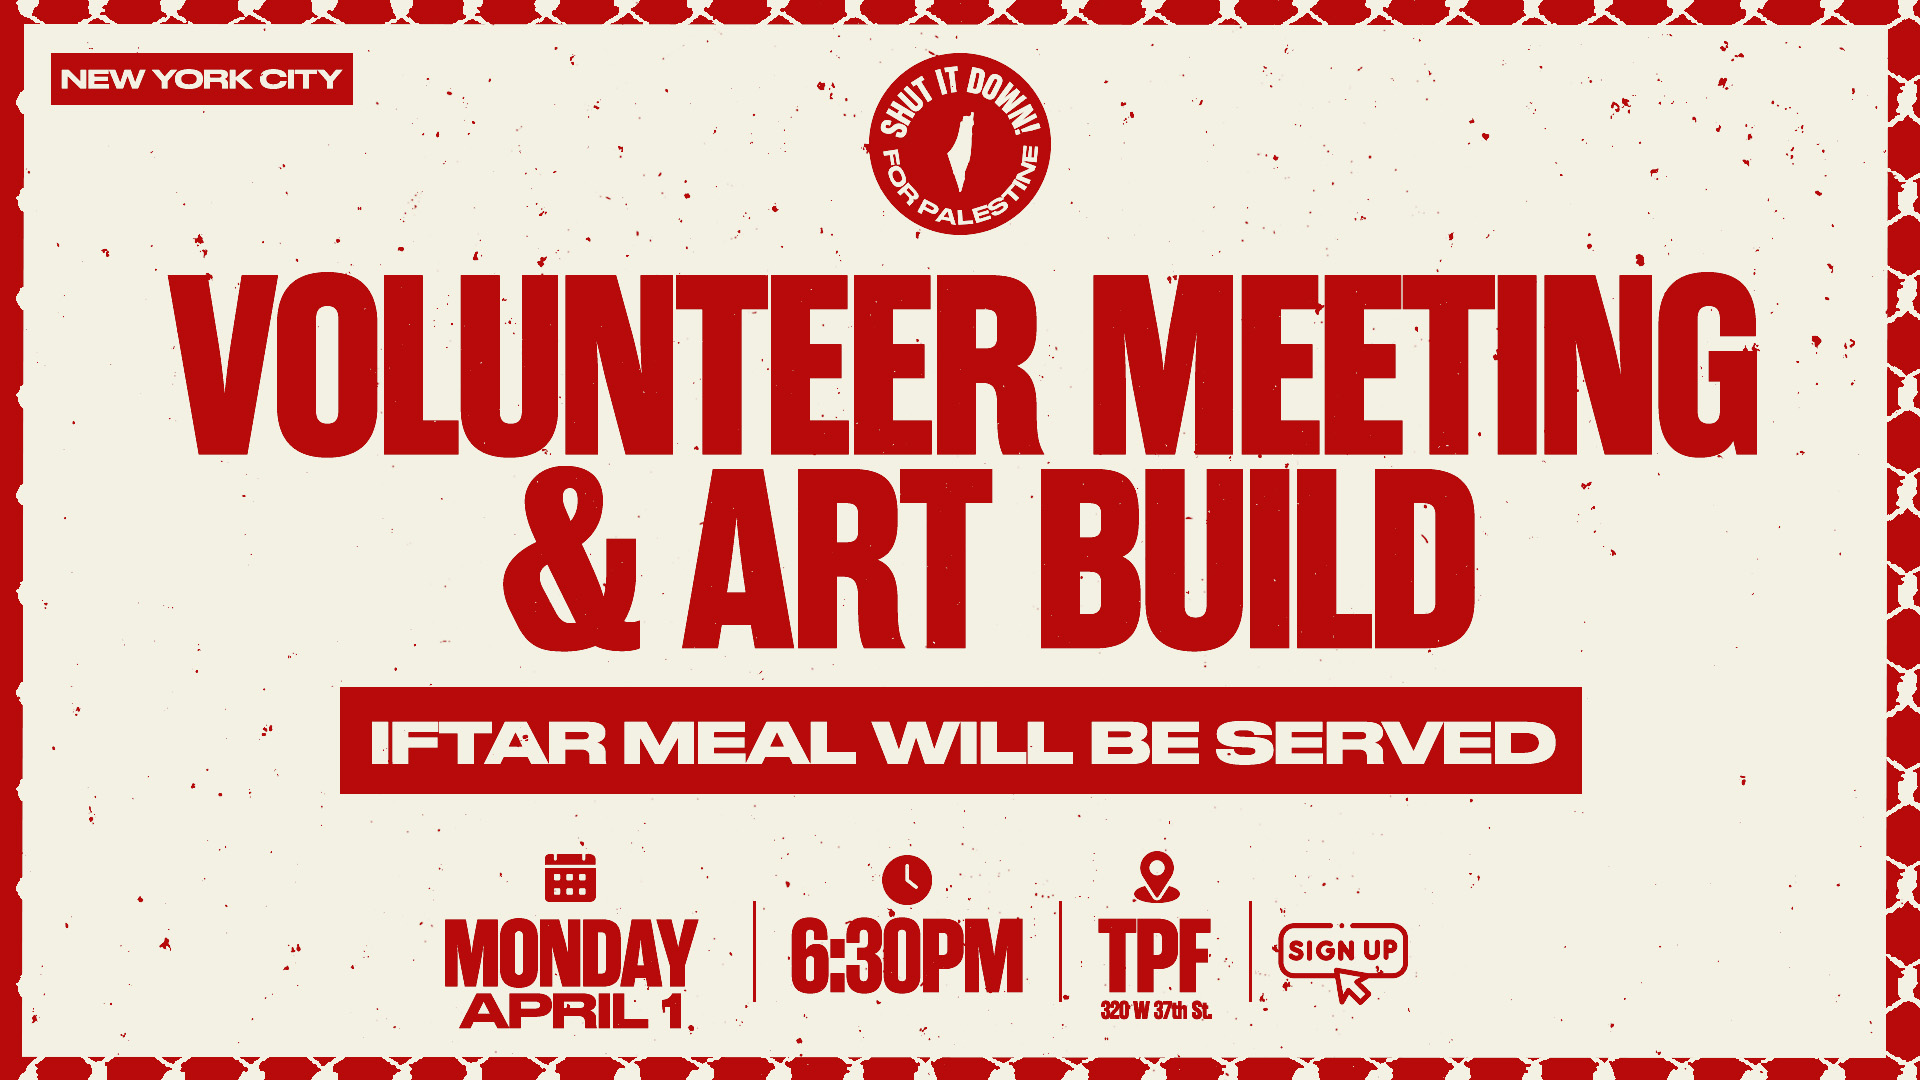 Cream and Red banner that reads VOLUNTEER MEETING & ART BUILD, MONDAY, APRIL 1